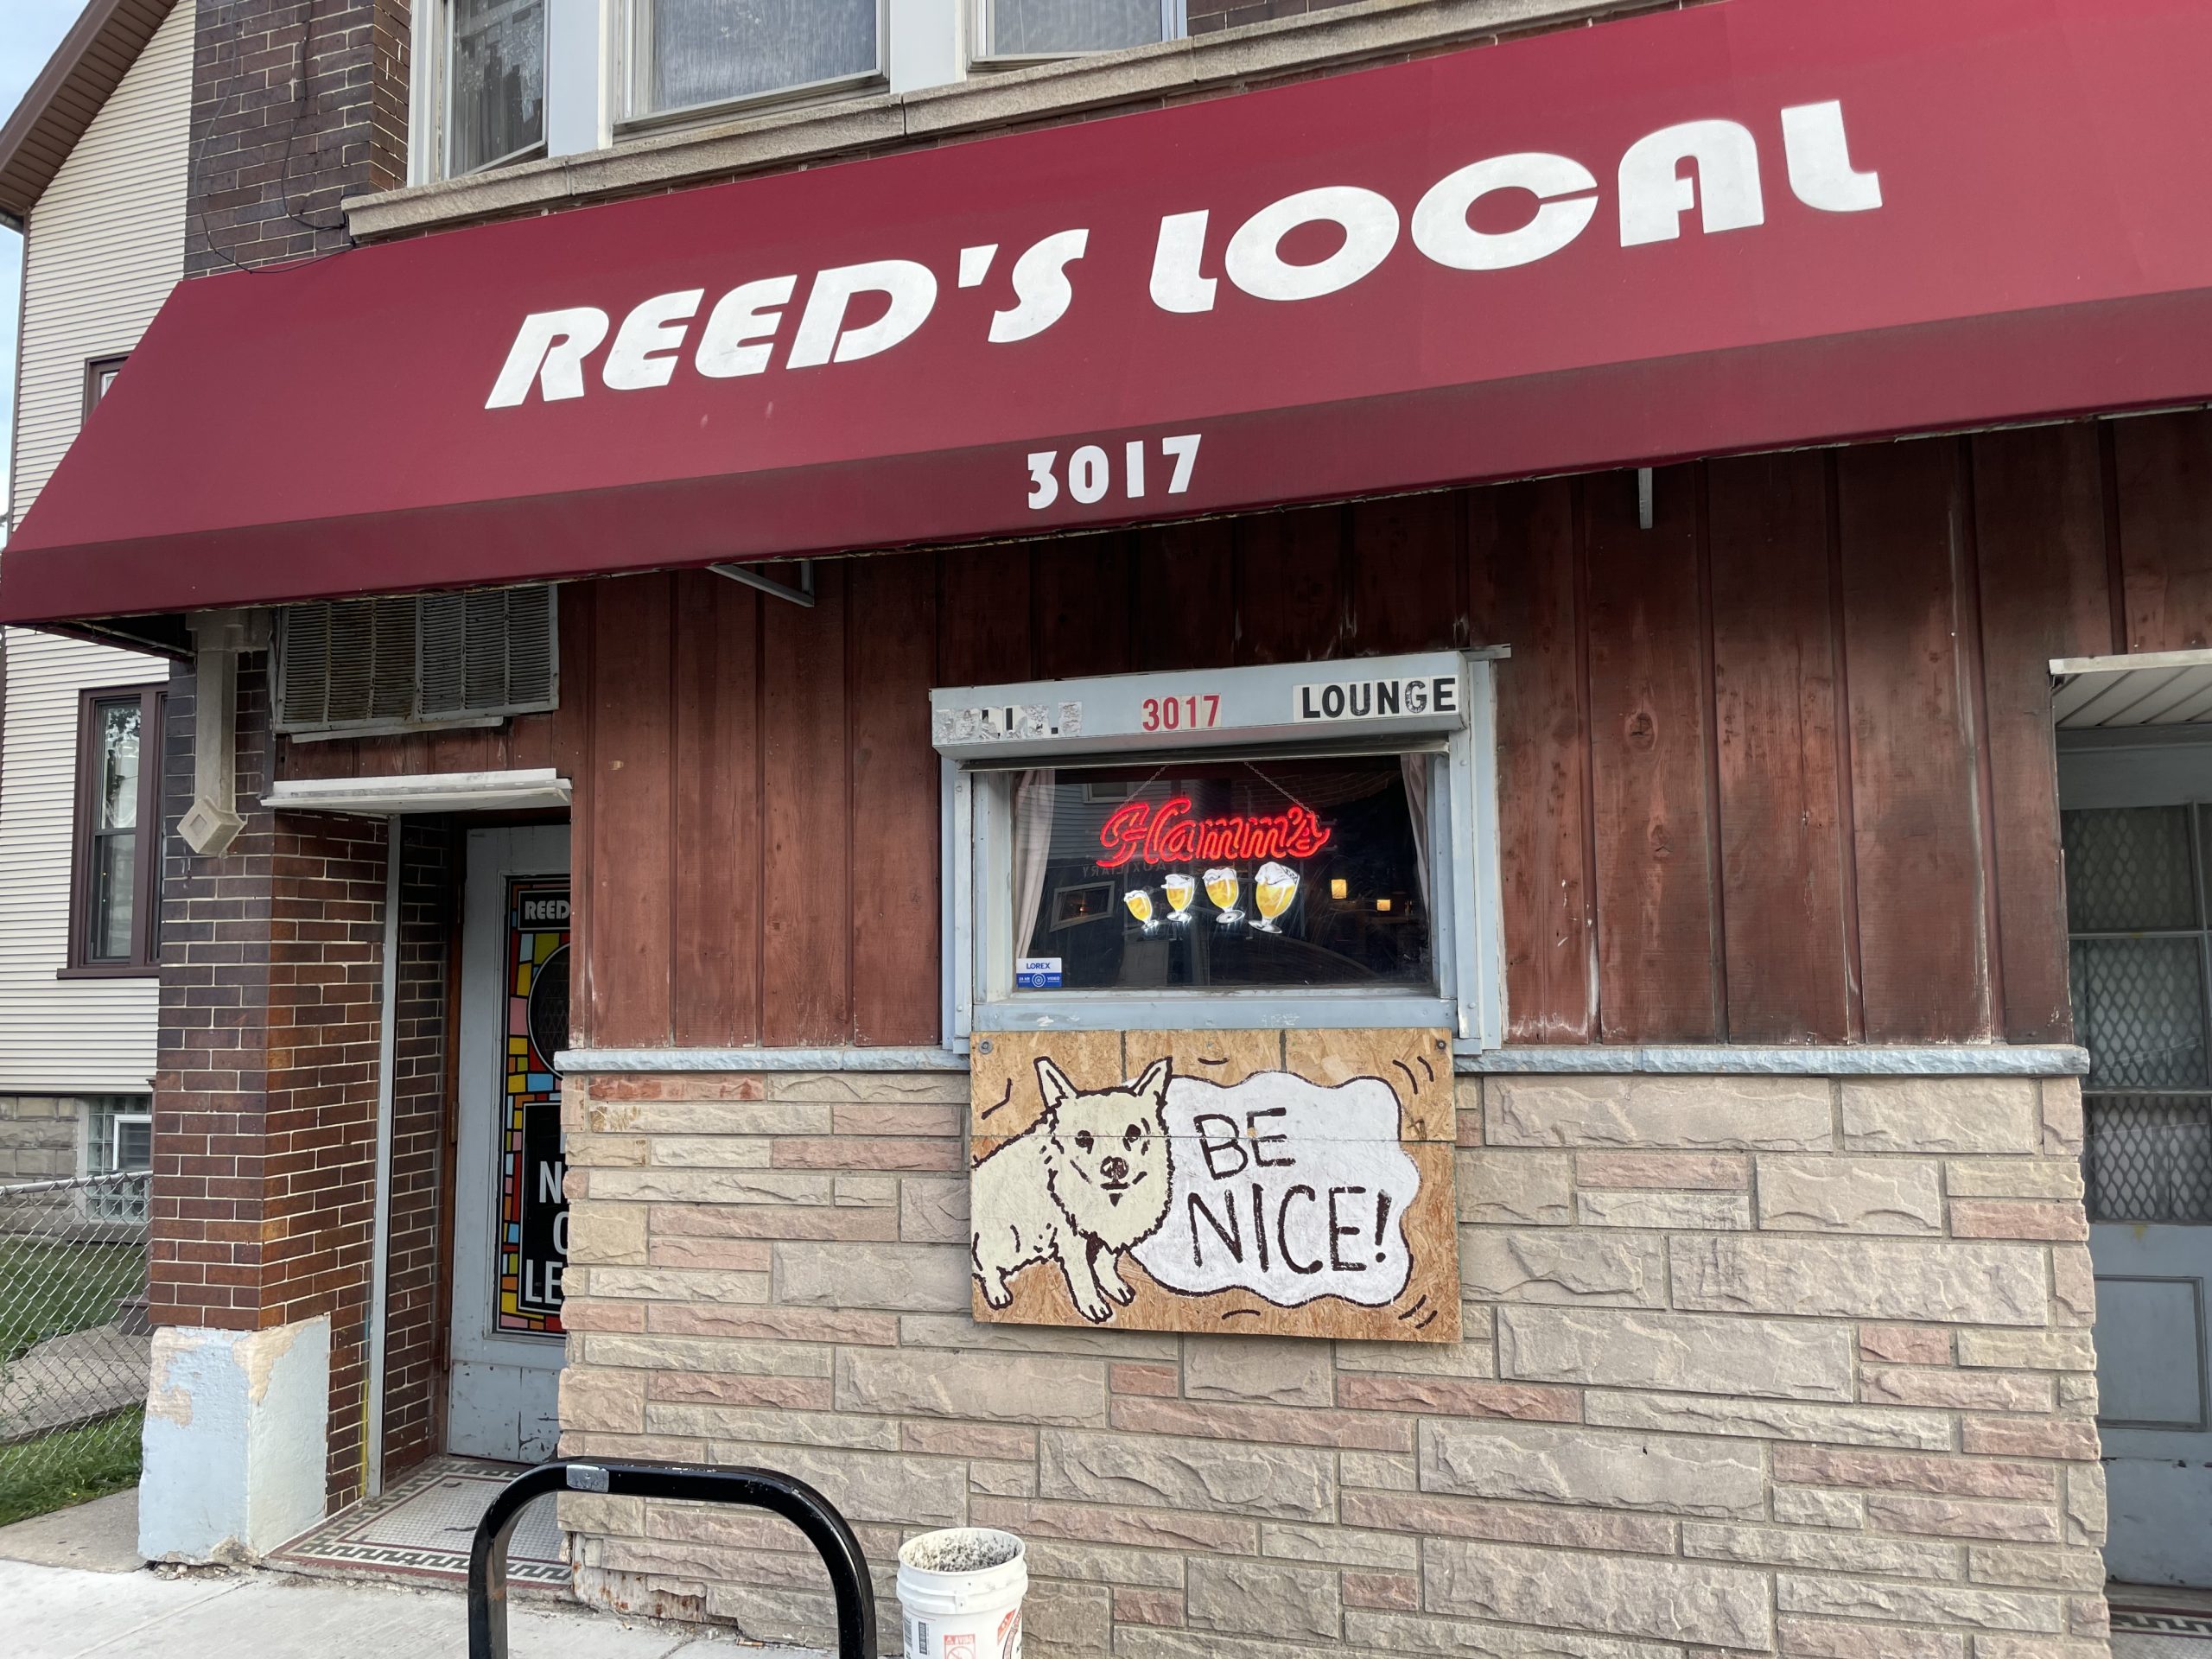 Reed's Local - Chicago Dive Bar - Exterior